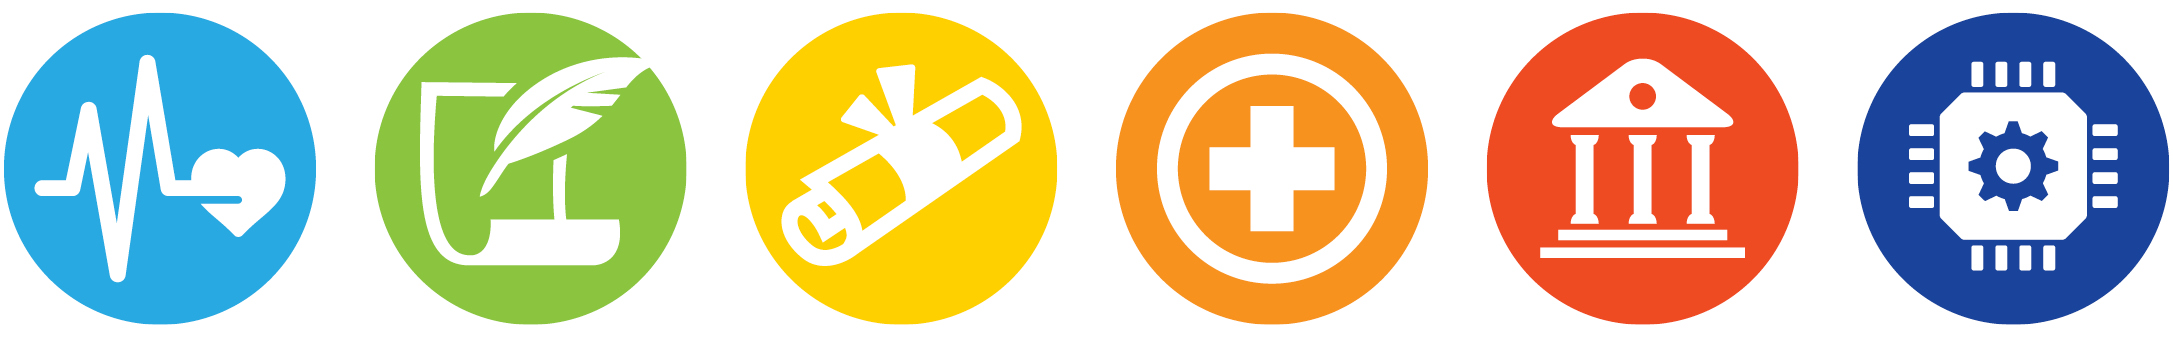 Academic and Career Pathways Icons